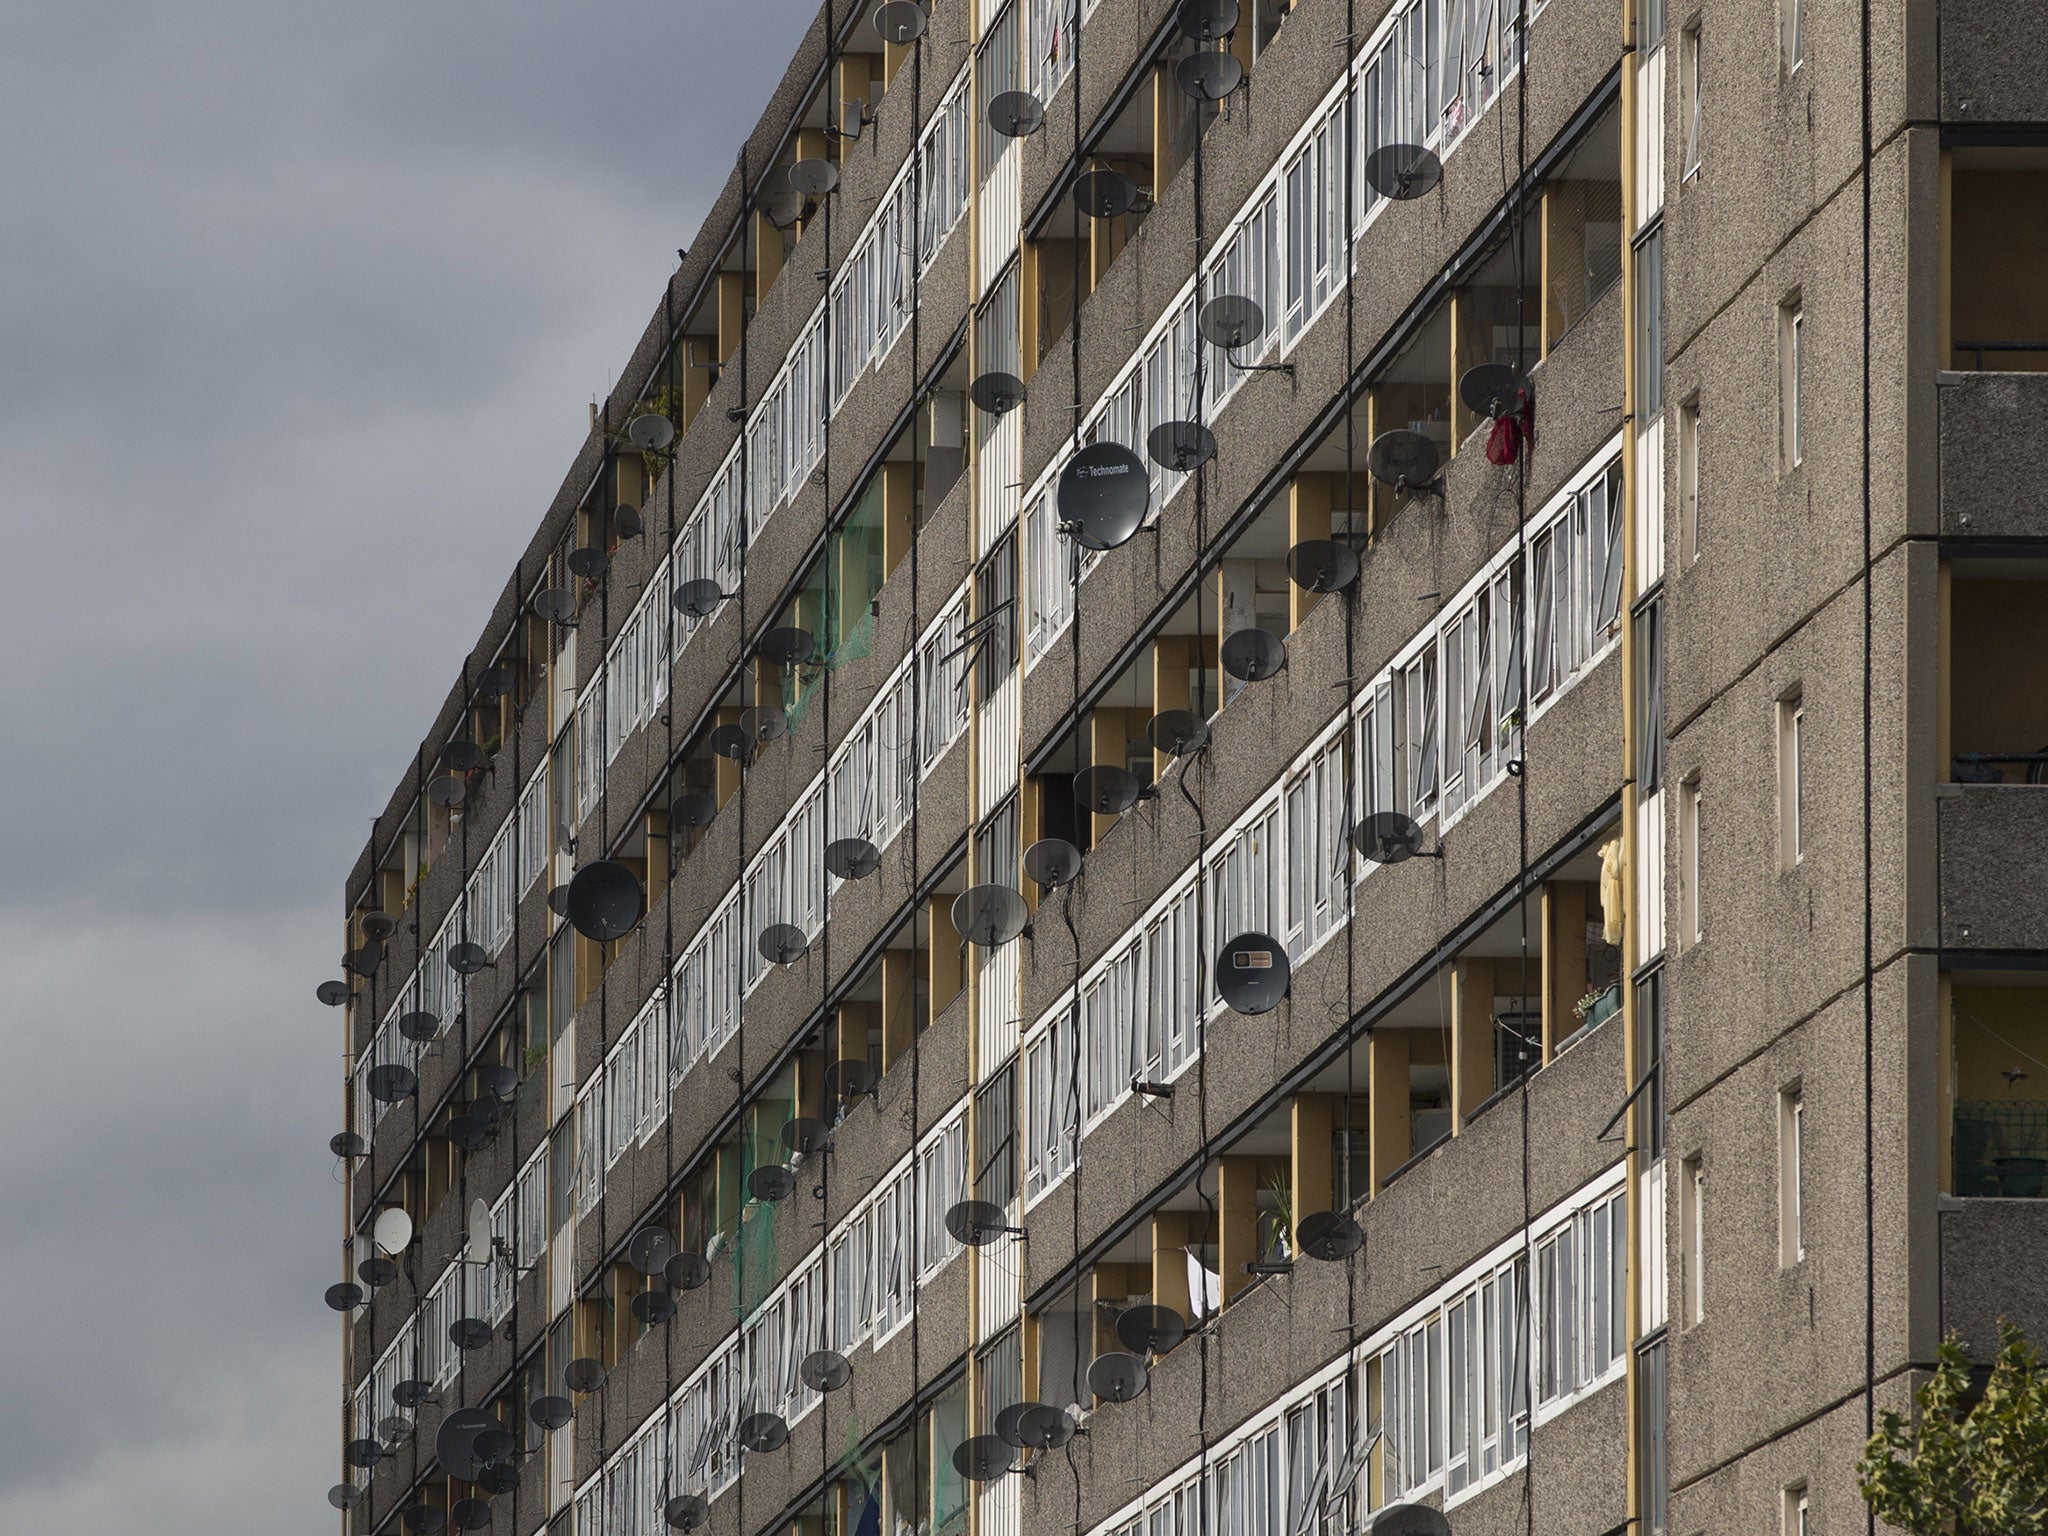 A tower block in Southwark, south London, an area with a high concentration of social housing